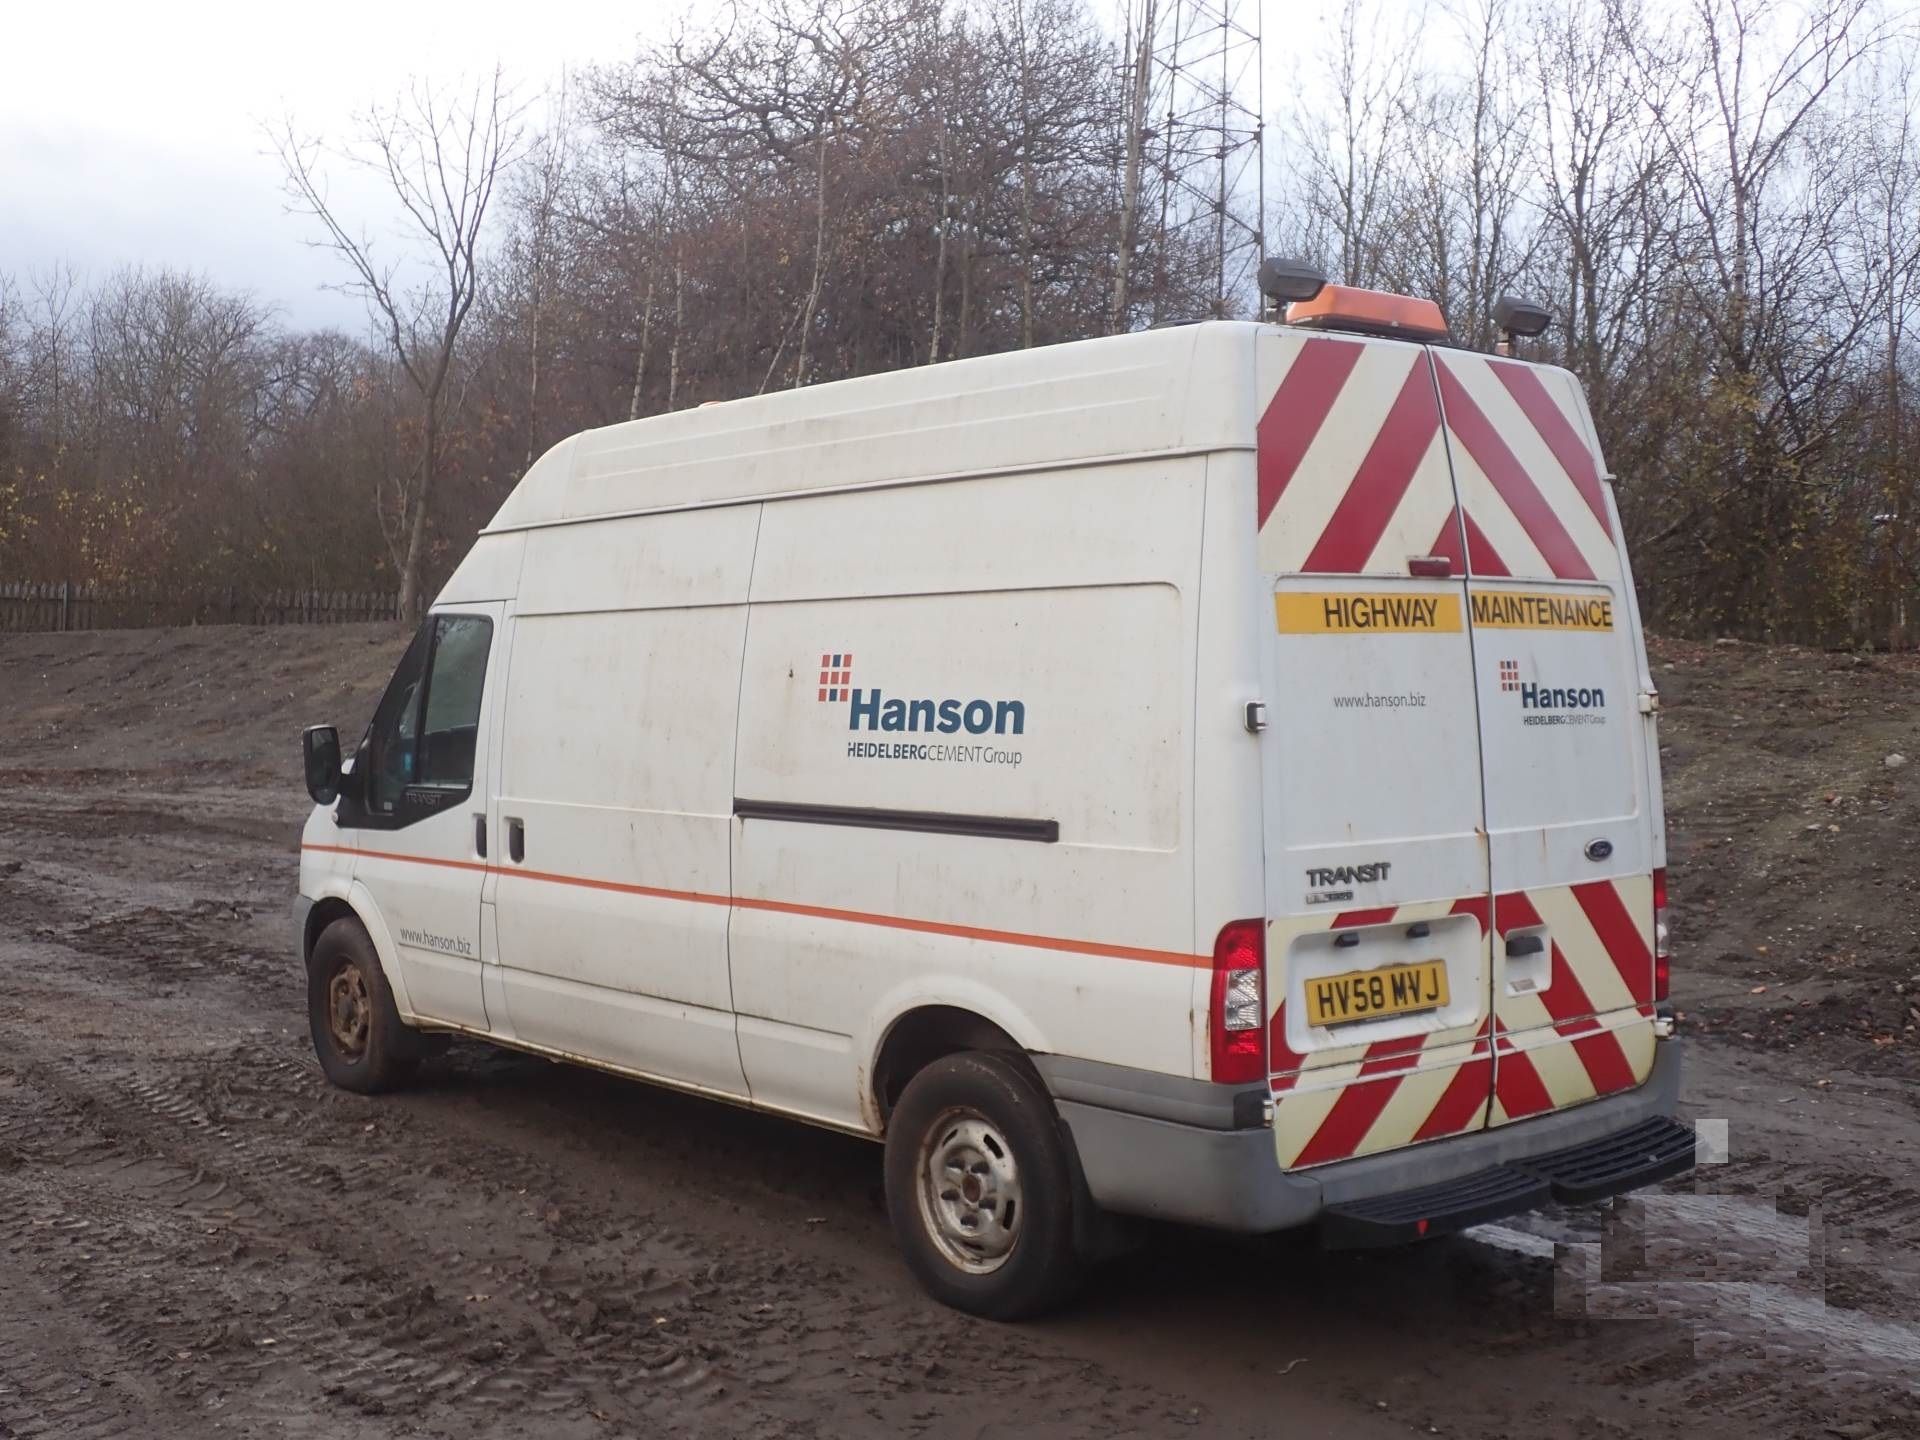 2008 Ford Transit 350 LWB 115 RWD 5 Door Panel Van - CL505 - Location: Corby, Northamptonshire - Image 9 of 12